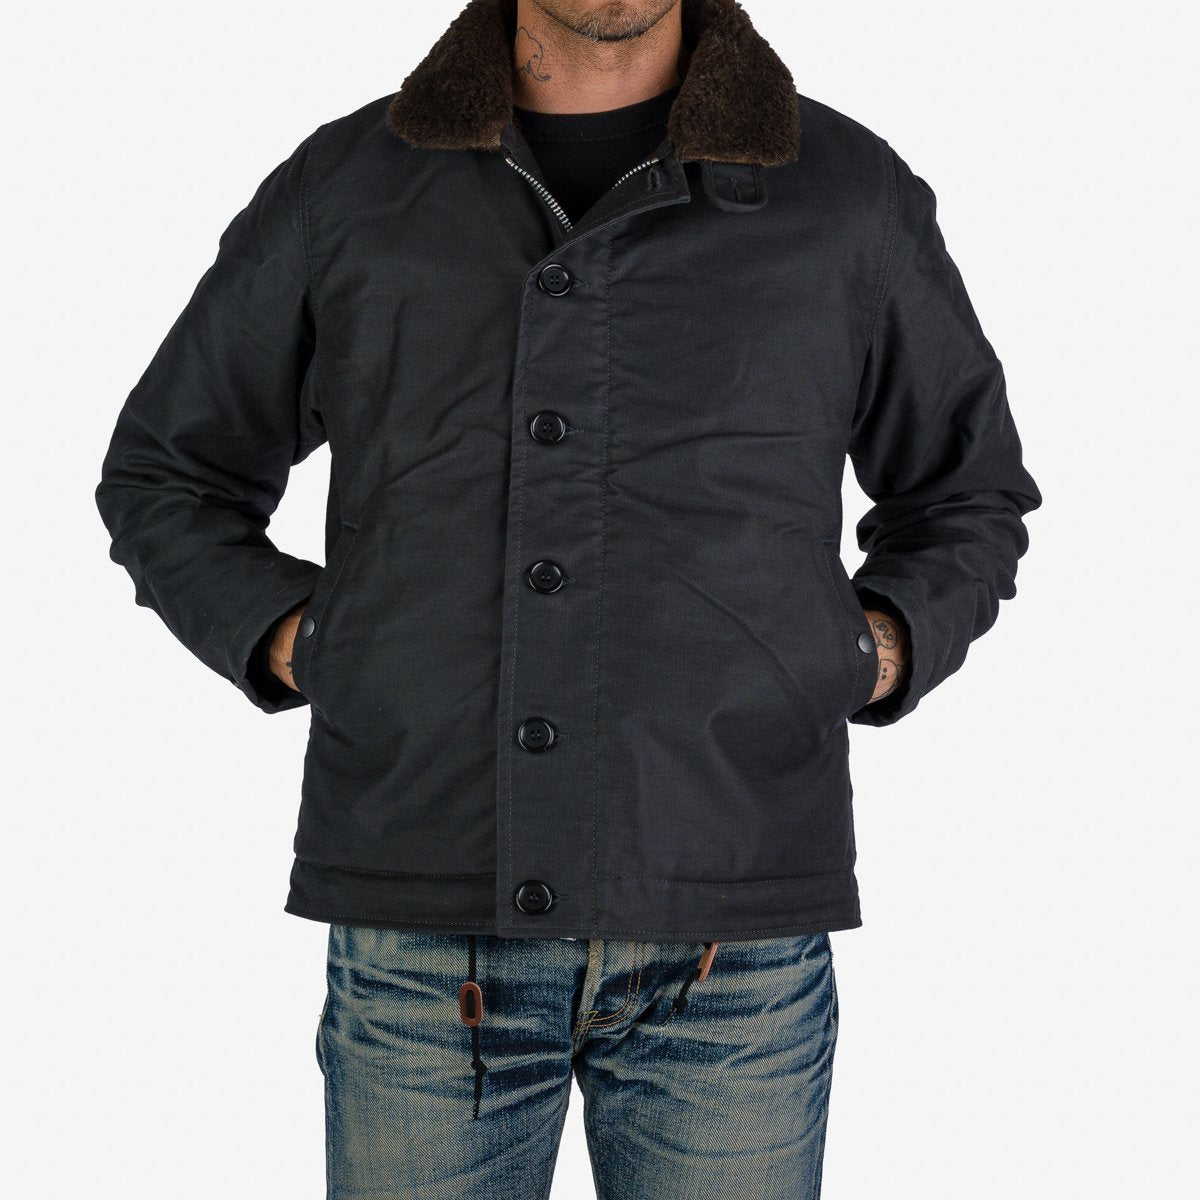 Iron Heart IHM-37-BLK Oiled Whipcord N1 Deck Jacket - Black